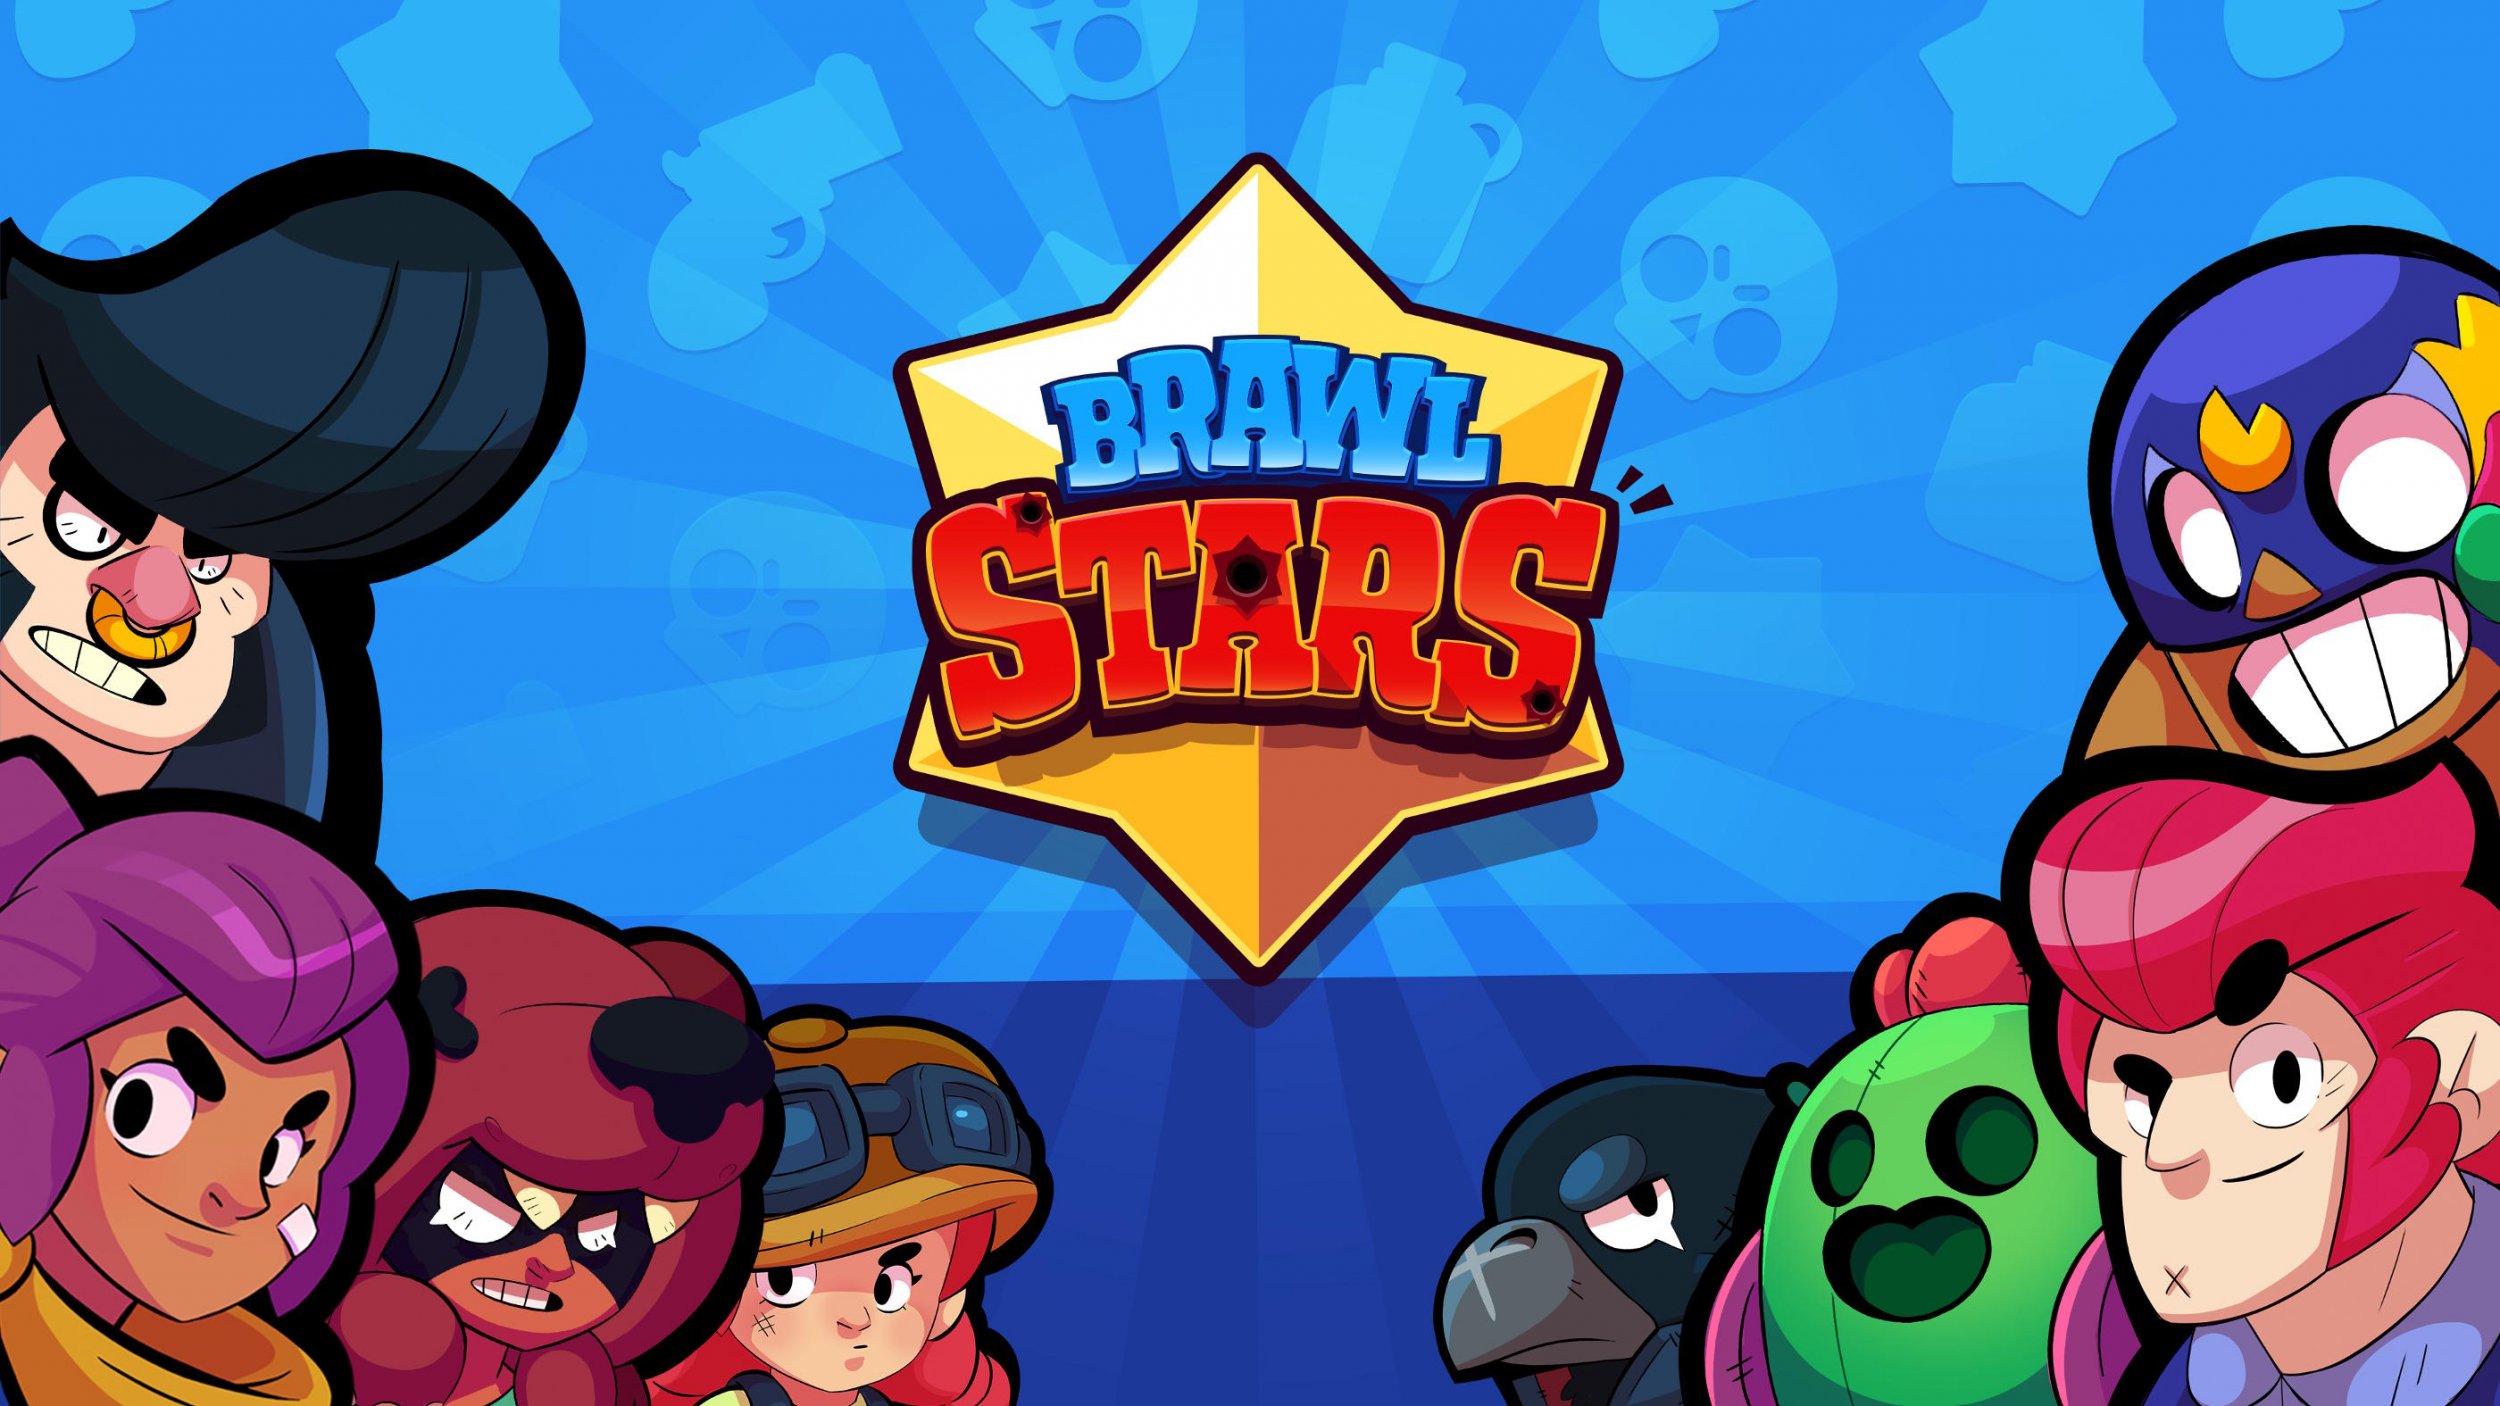 Brawl Stars Update New Upgrade System Landscape Mode And More - brawl stars points needed for level up